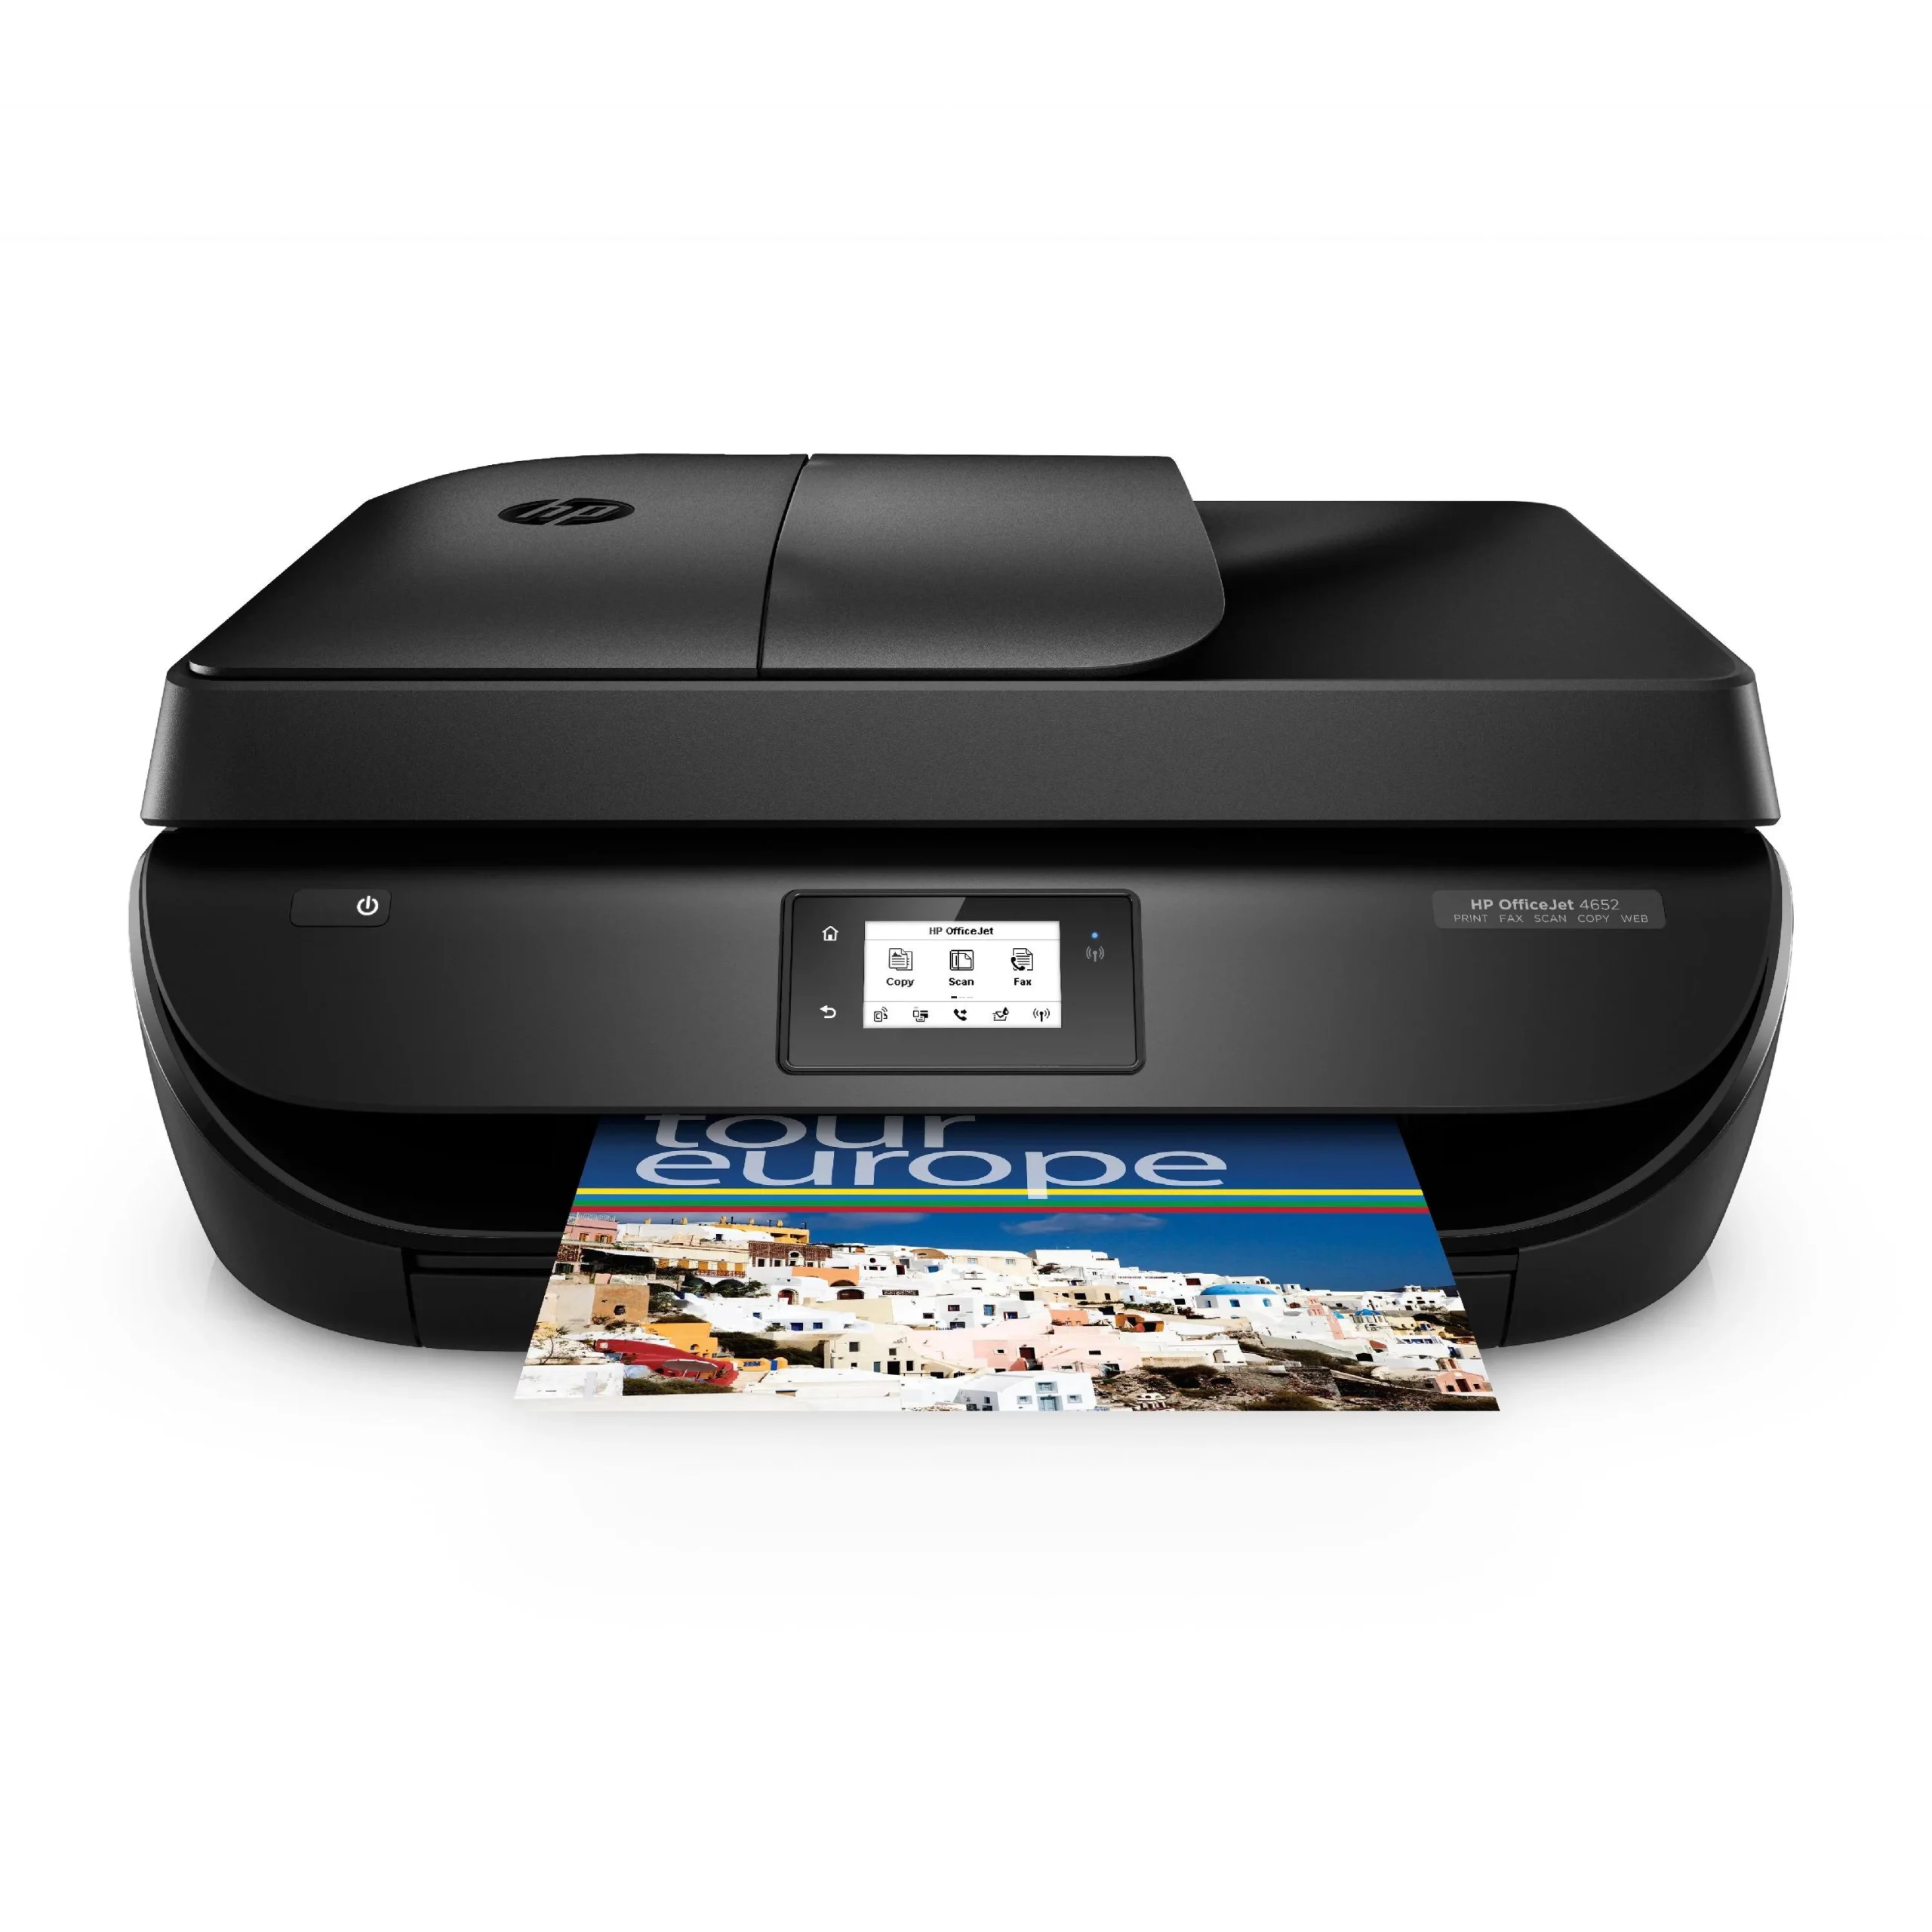 Hp officejet 4652: the perfect all-in-one printer for windows 10